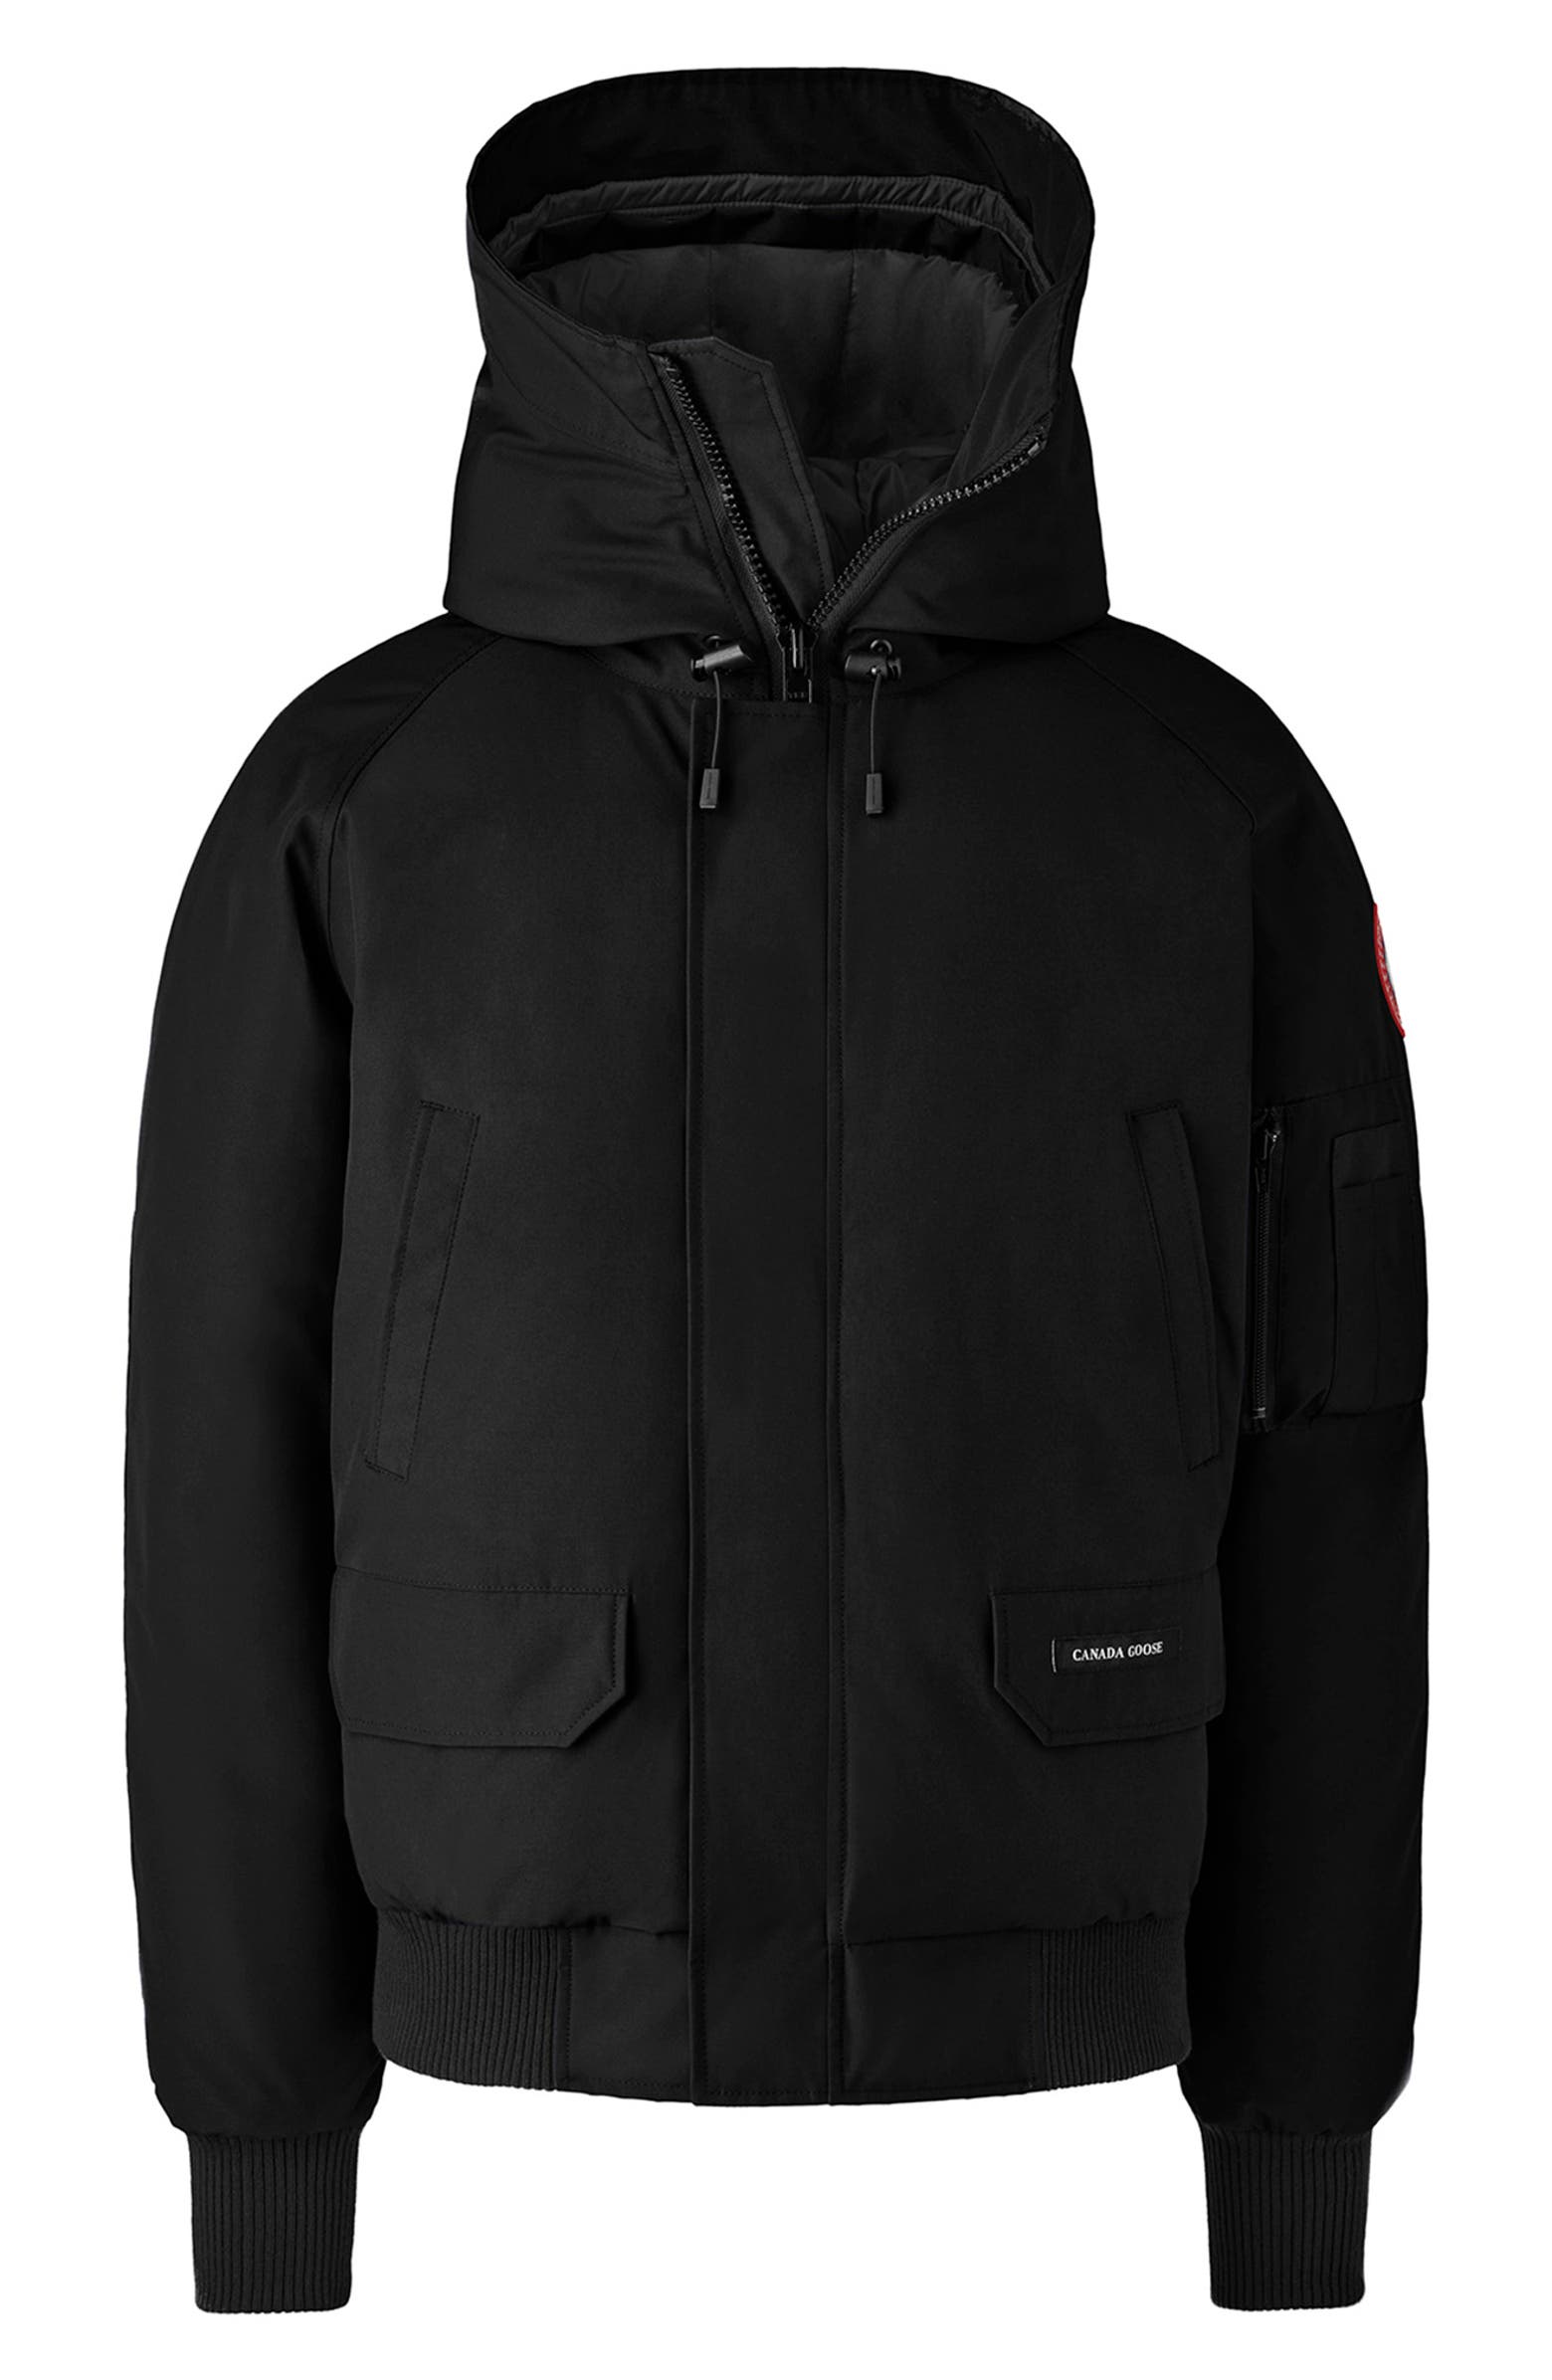 Canada Goose Chilliwack 625-Fill Power Down Bomber Jacket | Nordstrom